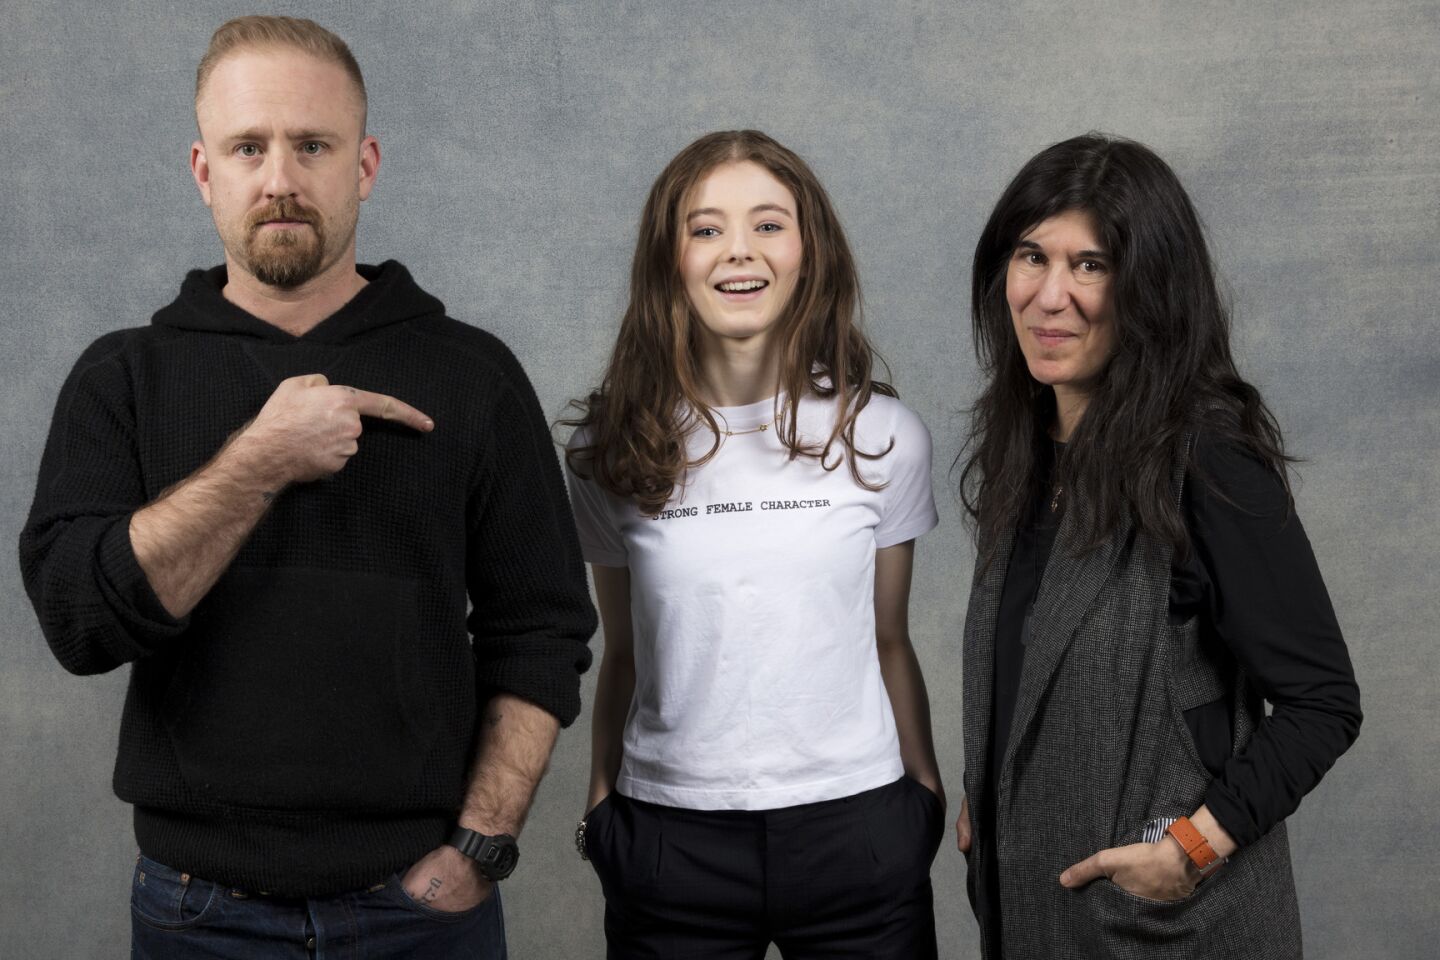 Actor Ben Foster, actress Thomasin McKenzie, and director Debra Granik from the film, "Leave No Trace," photographed in the L.A. Times Studio at Chase Sapphire on Main, during the Sundance Film Festival in Park City, Utah, Jan. 21, 2018.